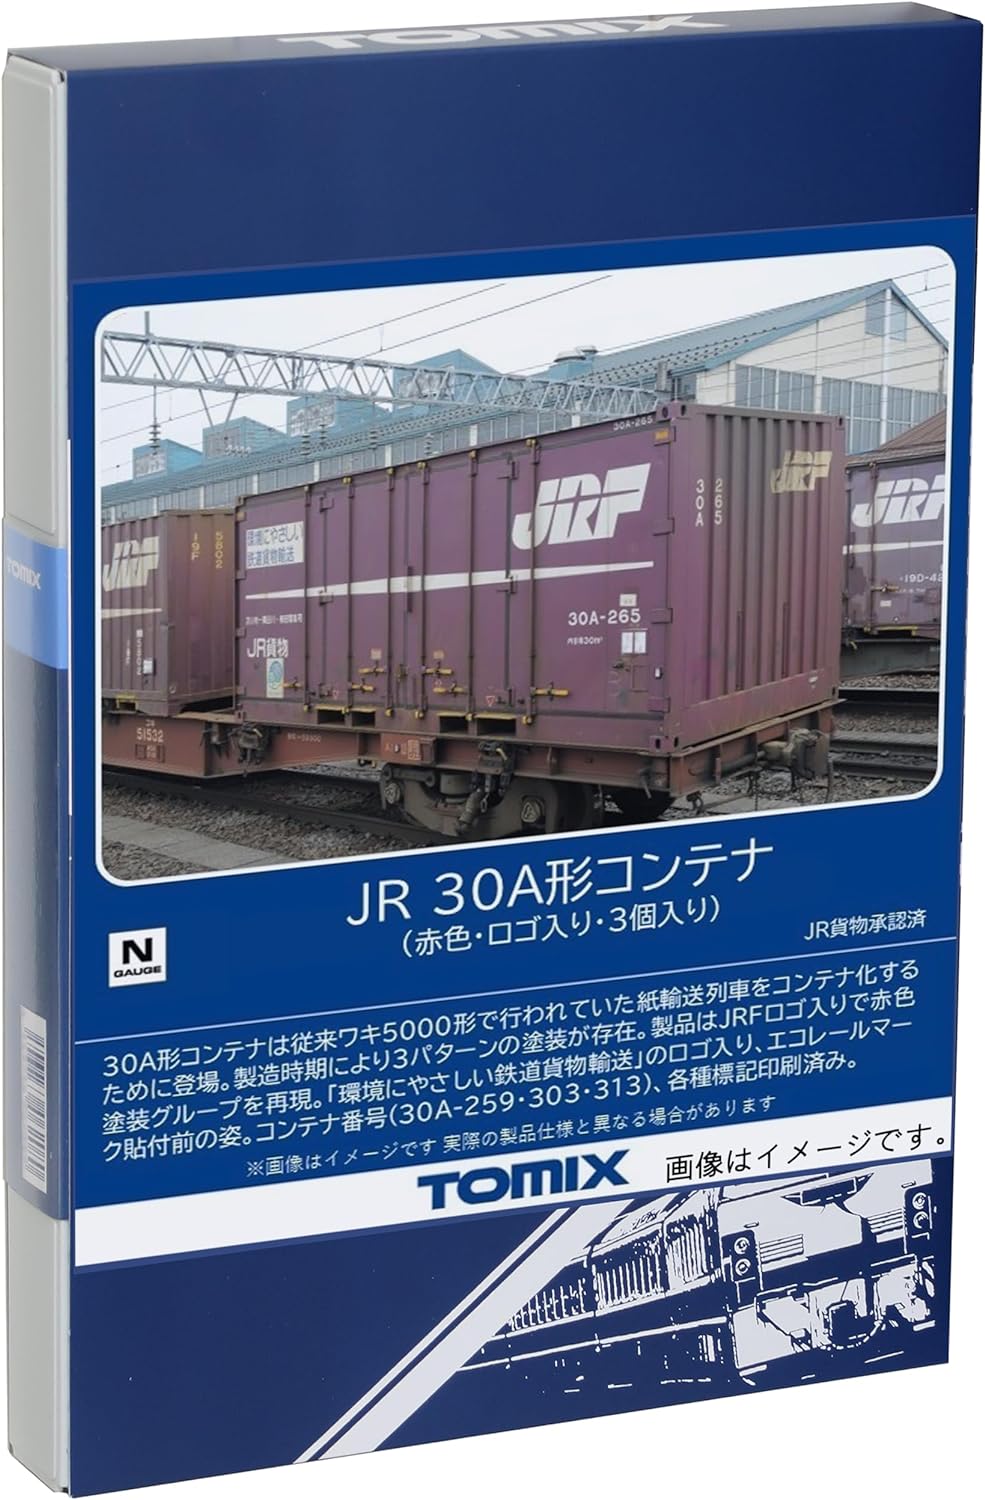 TOMIX 3301 N Gauge JR 30A Shape Container, Red with Logo, 3 Pieces, Model Railway Supplies - BanzaiHobby